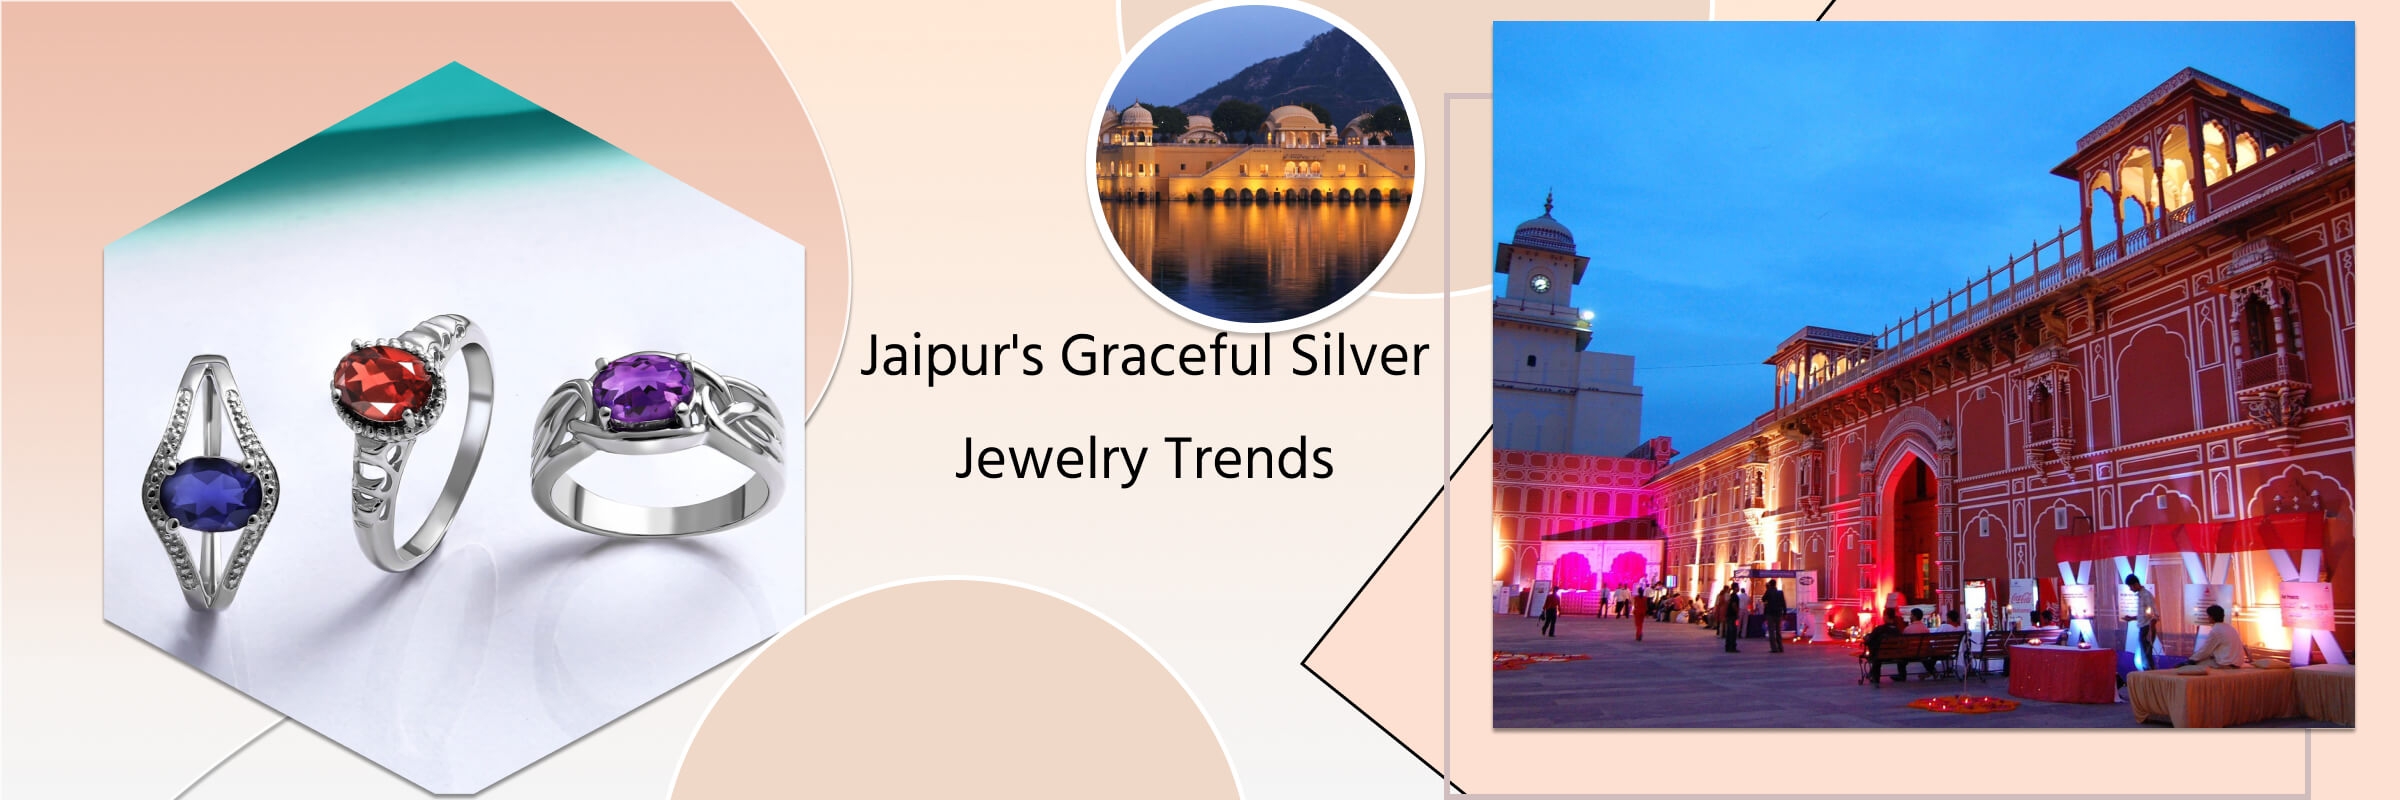 Jaipur's Silver Jewelry - Redefining Grace, Compassion, and Trend